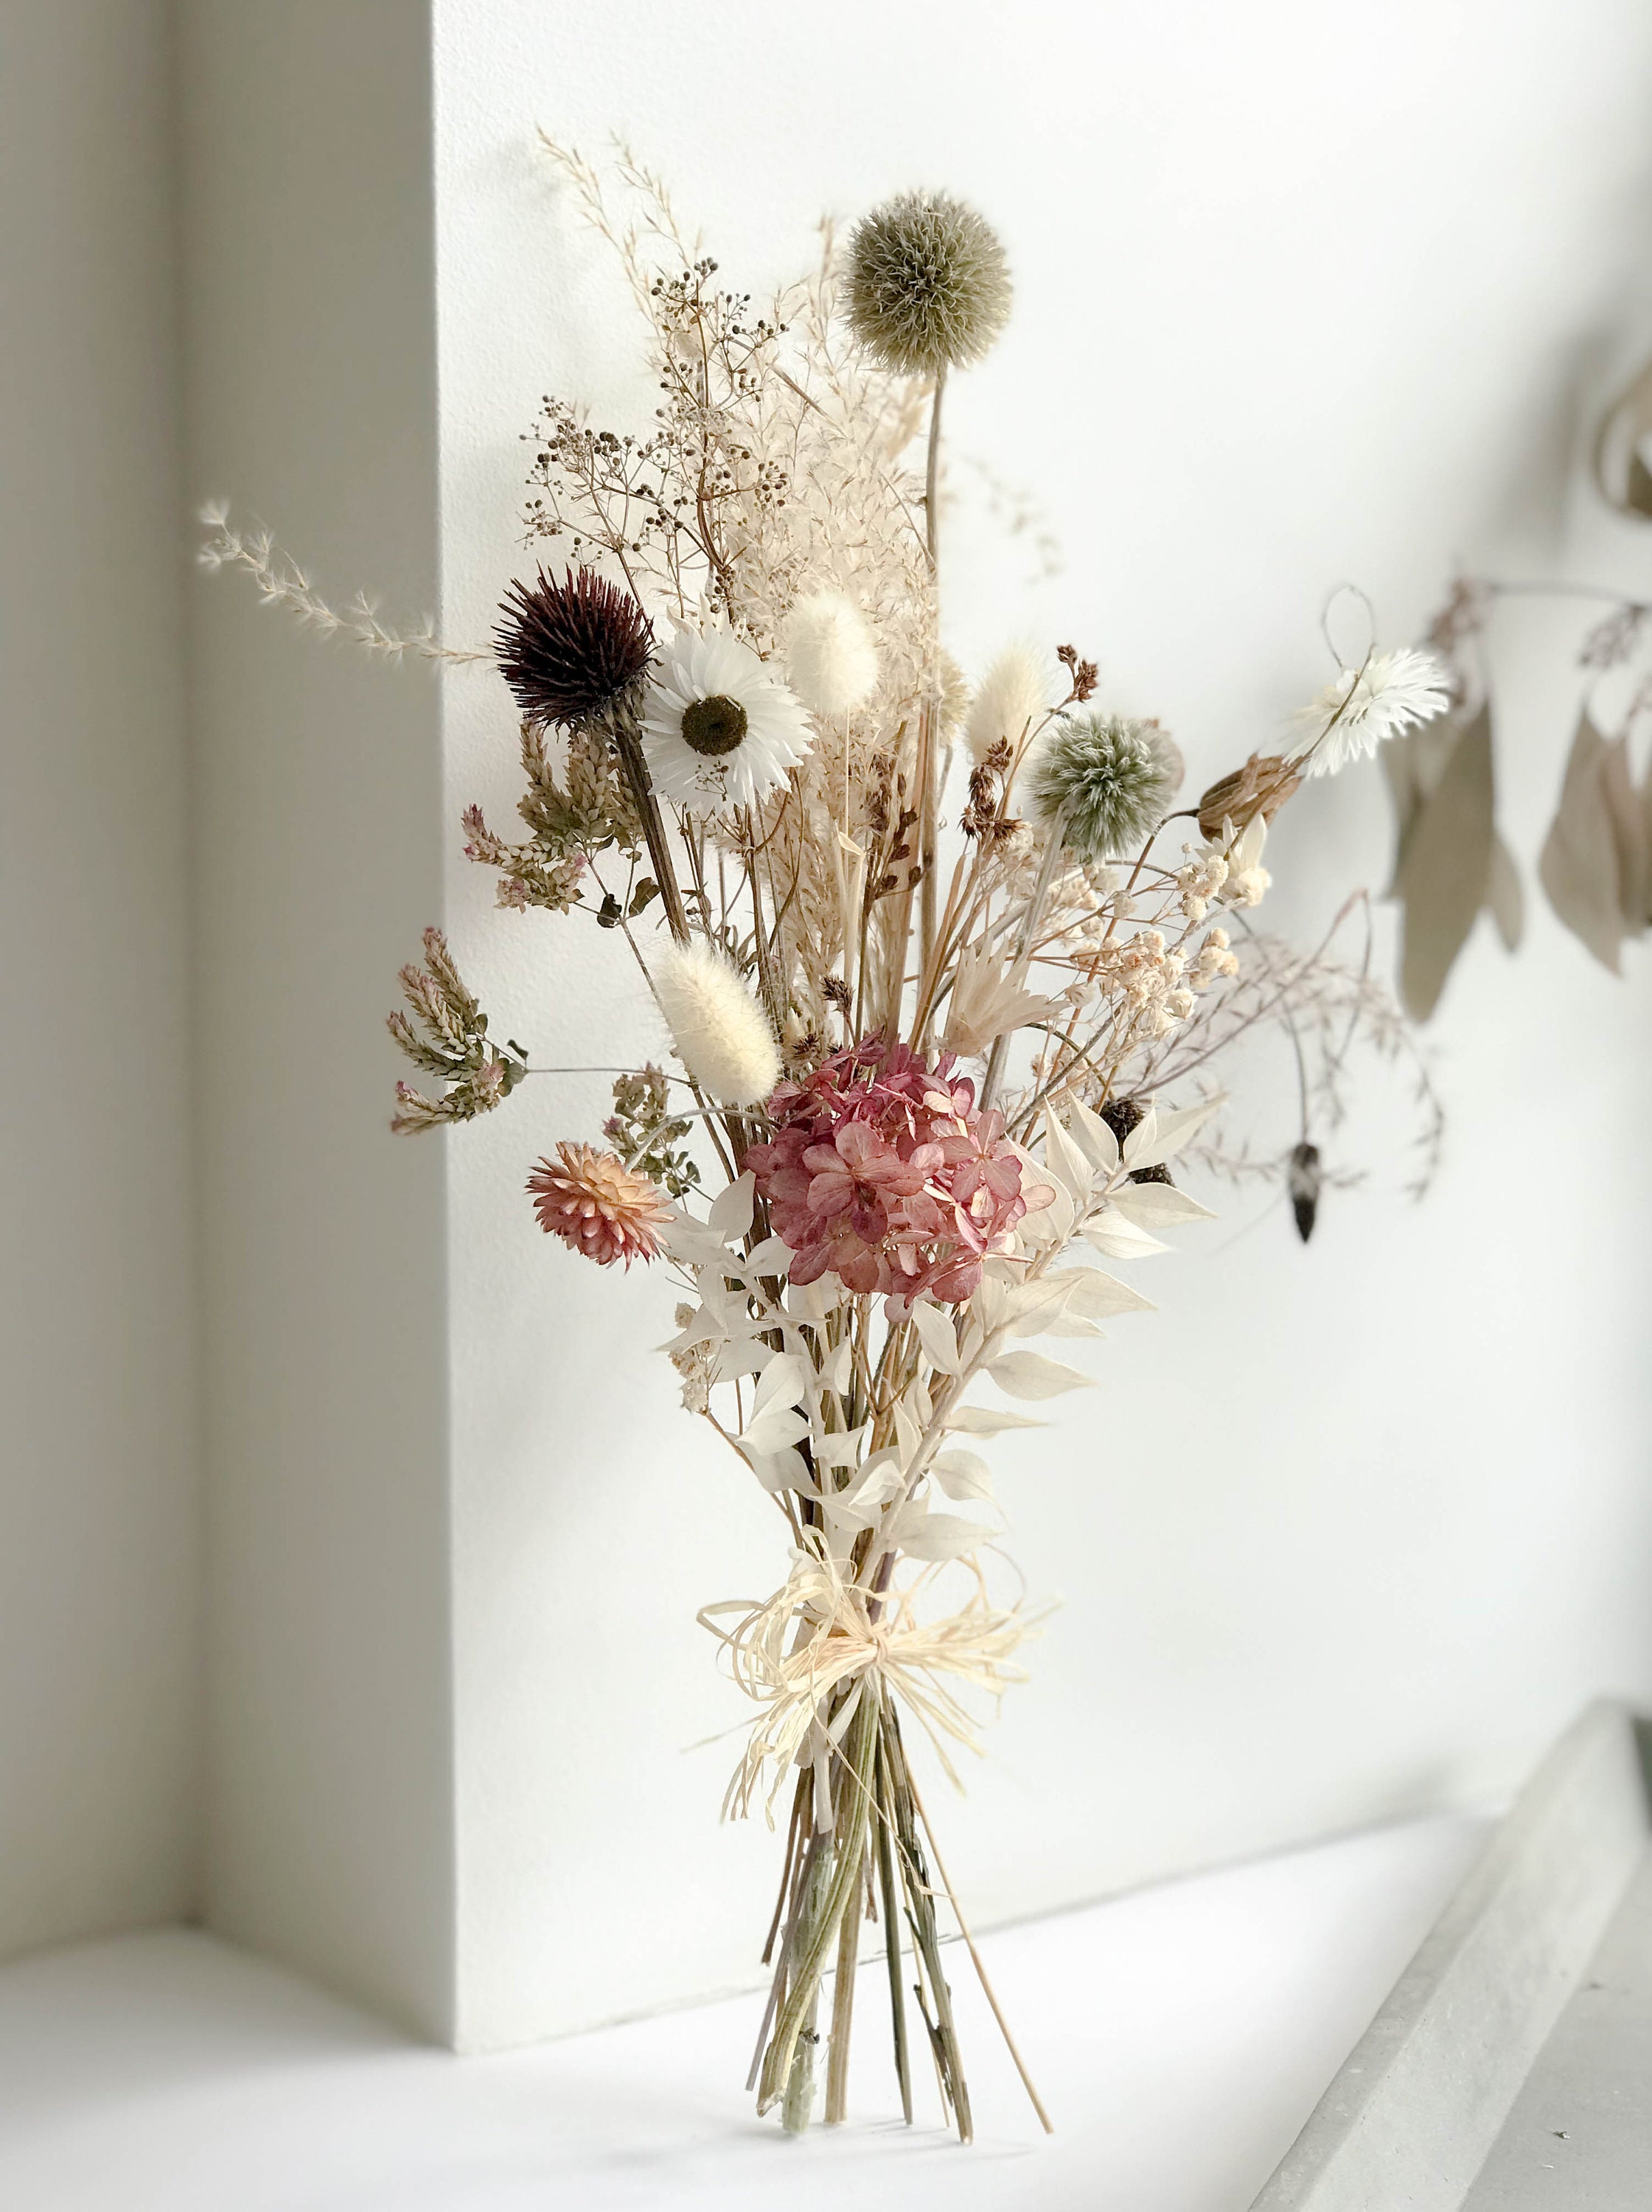 Dengmore Natural Dried Flowers Combination DIY Dry Flower Decorative for Crafts Jewelry White